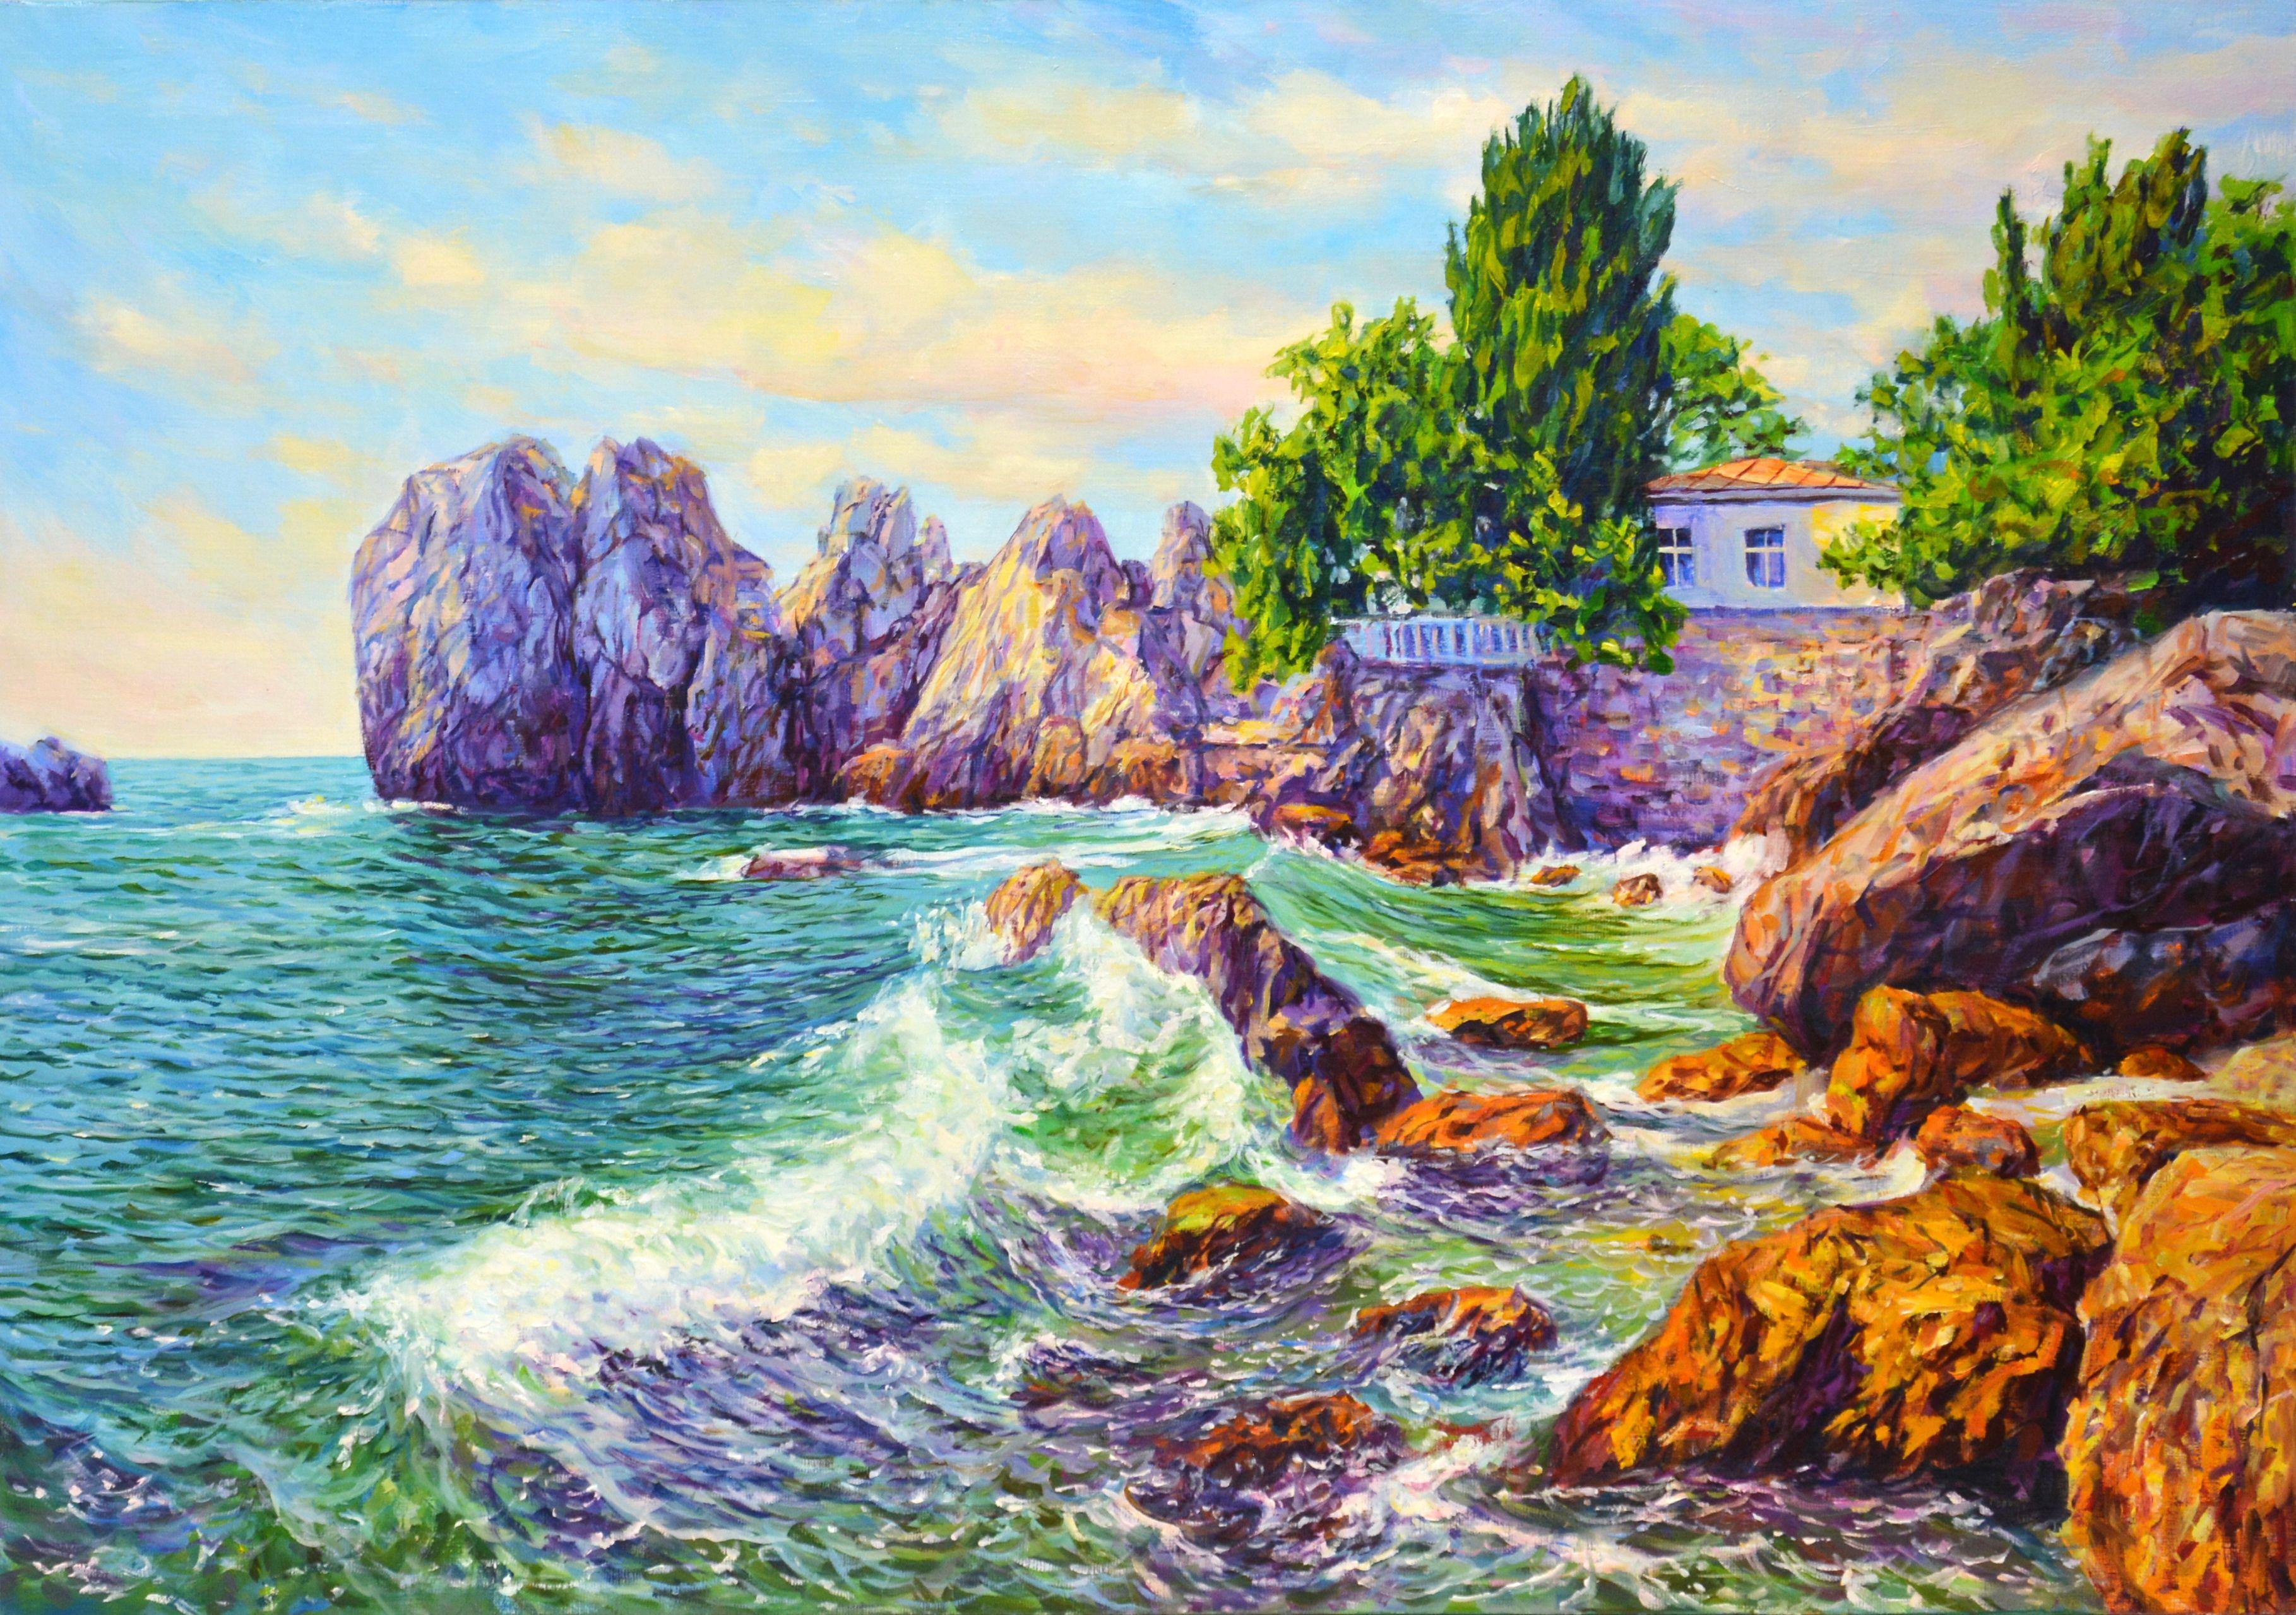 Painting Sea. Rocks. Stones: Nature is an inexhaustible source of inspiration. Seascape. Realism. The painting has good spatial quality and the colors make children happy. Oil painting on linen canvas. Quality materials are used. It is varnished.